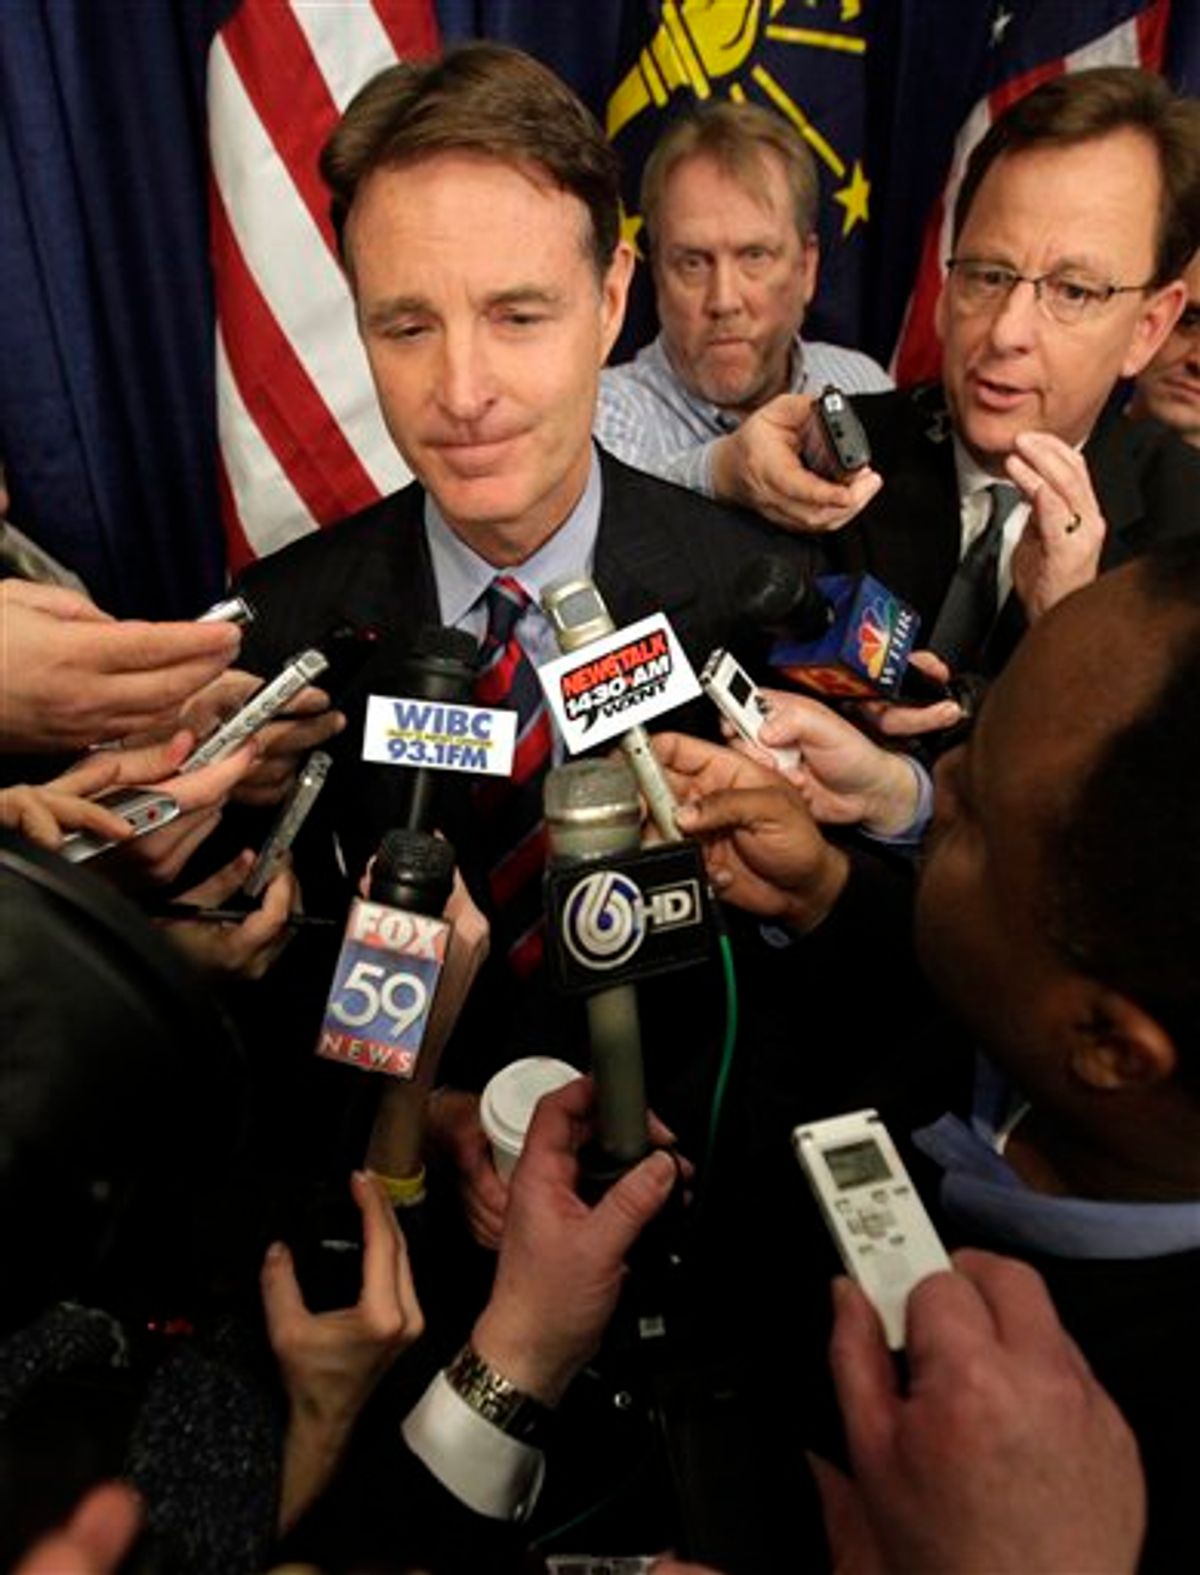 Sen. Evan Bayh, D-Ind., speaks with reporters after a news conference announcing he will not seek re-election in Indianapolis, Monday, Feb. 15, 2010. Bayh, a centrist Democrat from Indiana, announced Monday that he won't seek a third term in Congress, giving Republicans a chance to pick up a Senate seat. (AP Photo/AJ Mast) (AP)